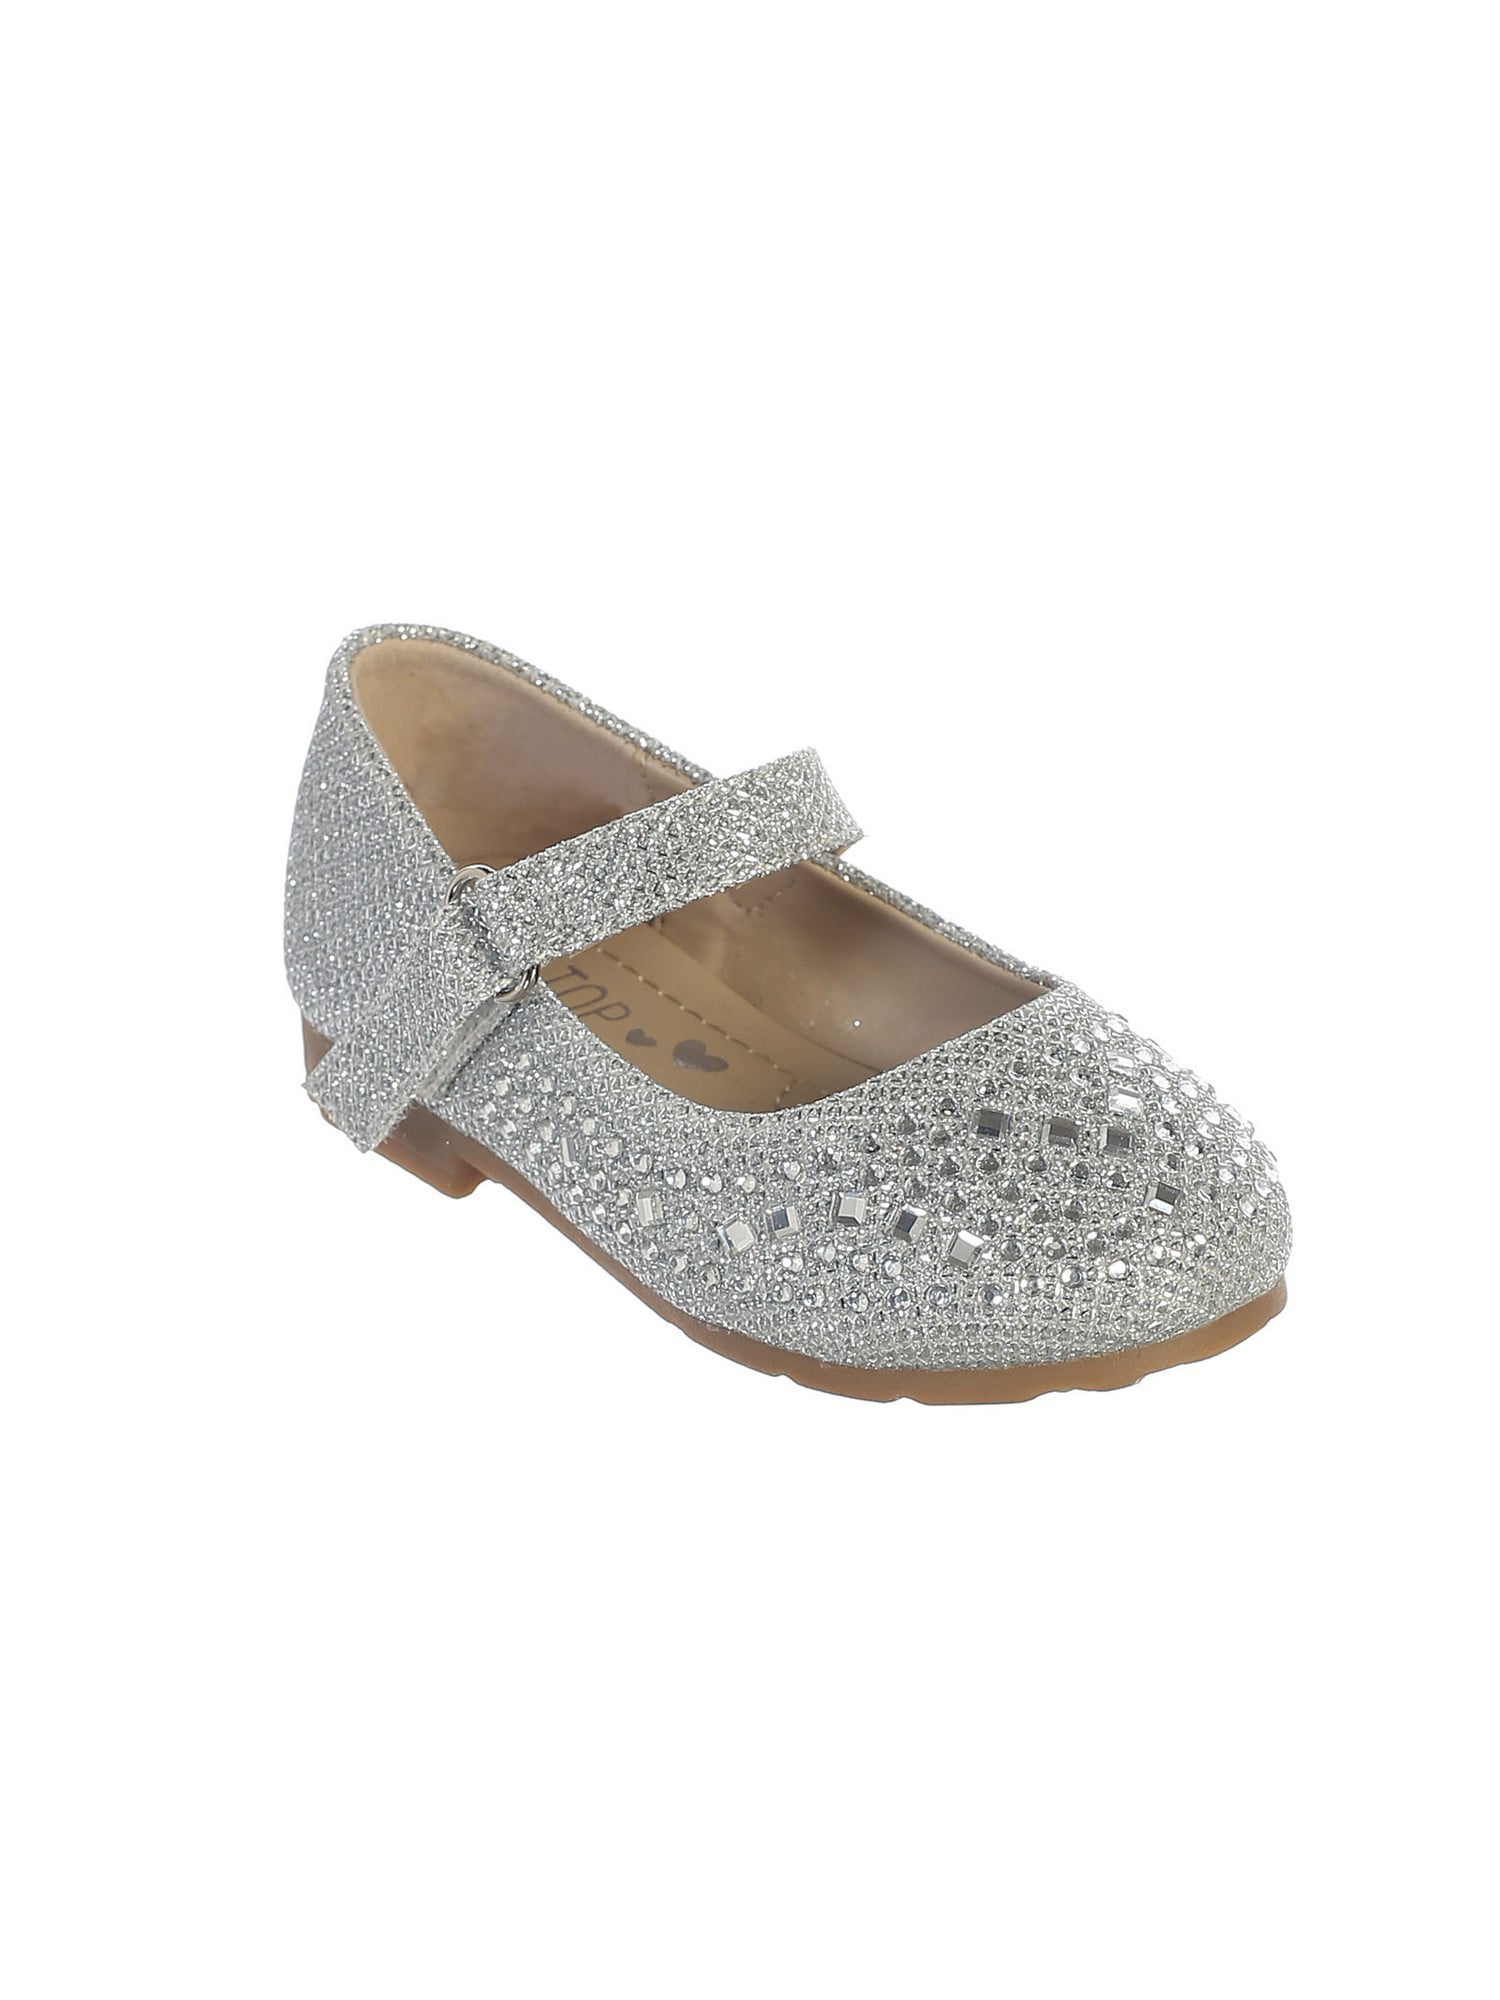 baby girl silver dress shoes